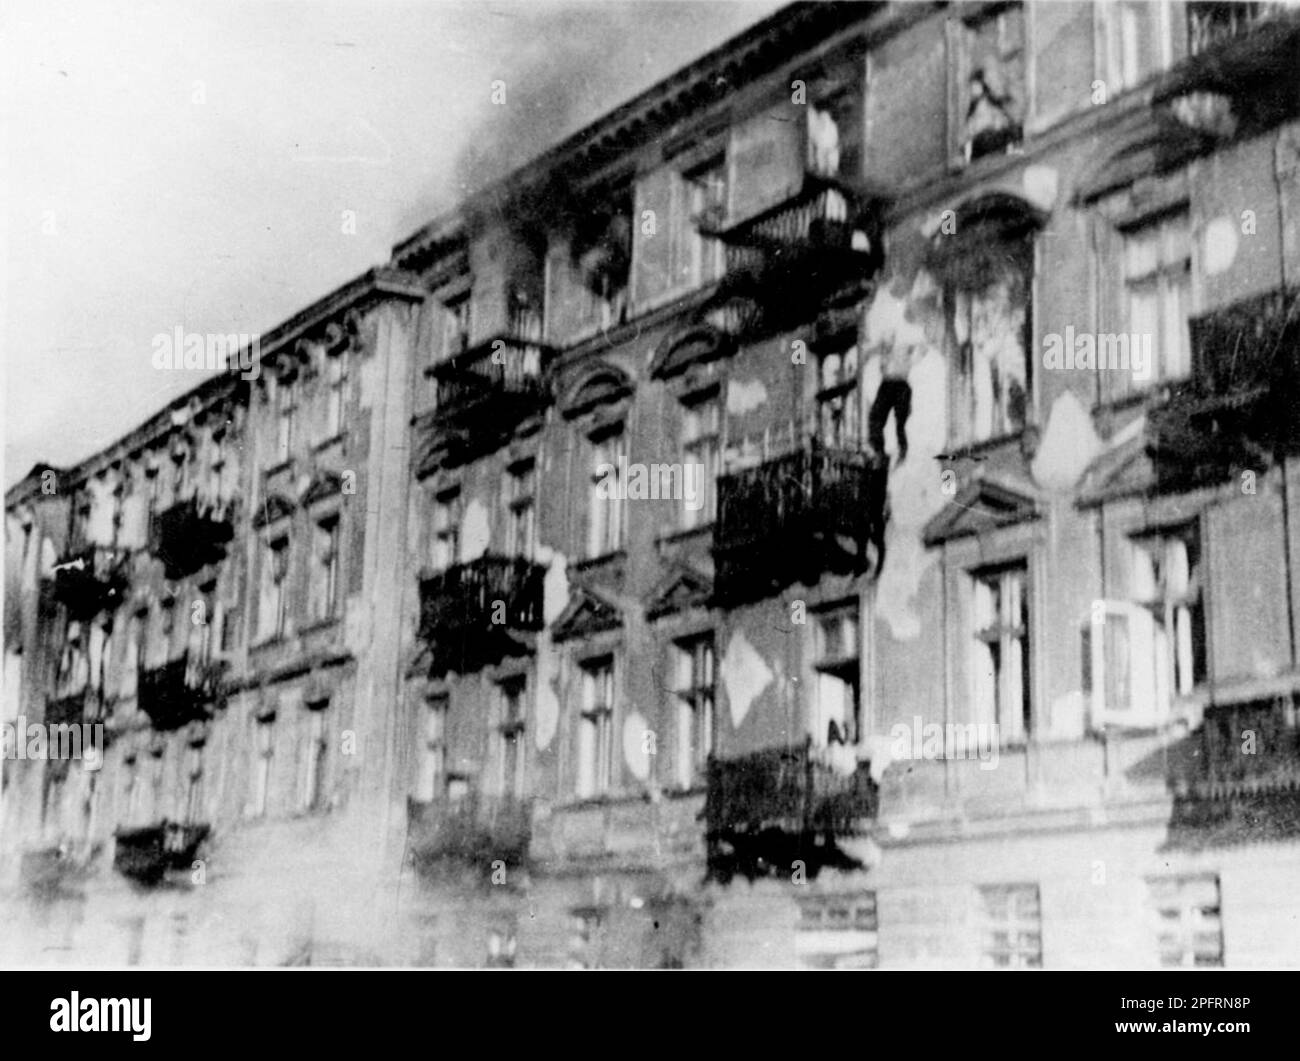 In January 1943 the nazis arrived to round up the Jews of the Warsaw Ghetto  The Jews, resolved to fight it out, took on the SS with homemade and primitive weapons. The defenders were executed or deported and the Ghetto area was systematically demolished. This event is known as The Ghetto Uprising.. This image shows a man falling to his death rather than be caught. This image is from the German photographic record of the event, known as the Stroop report. Stock Photo